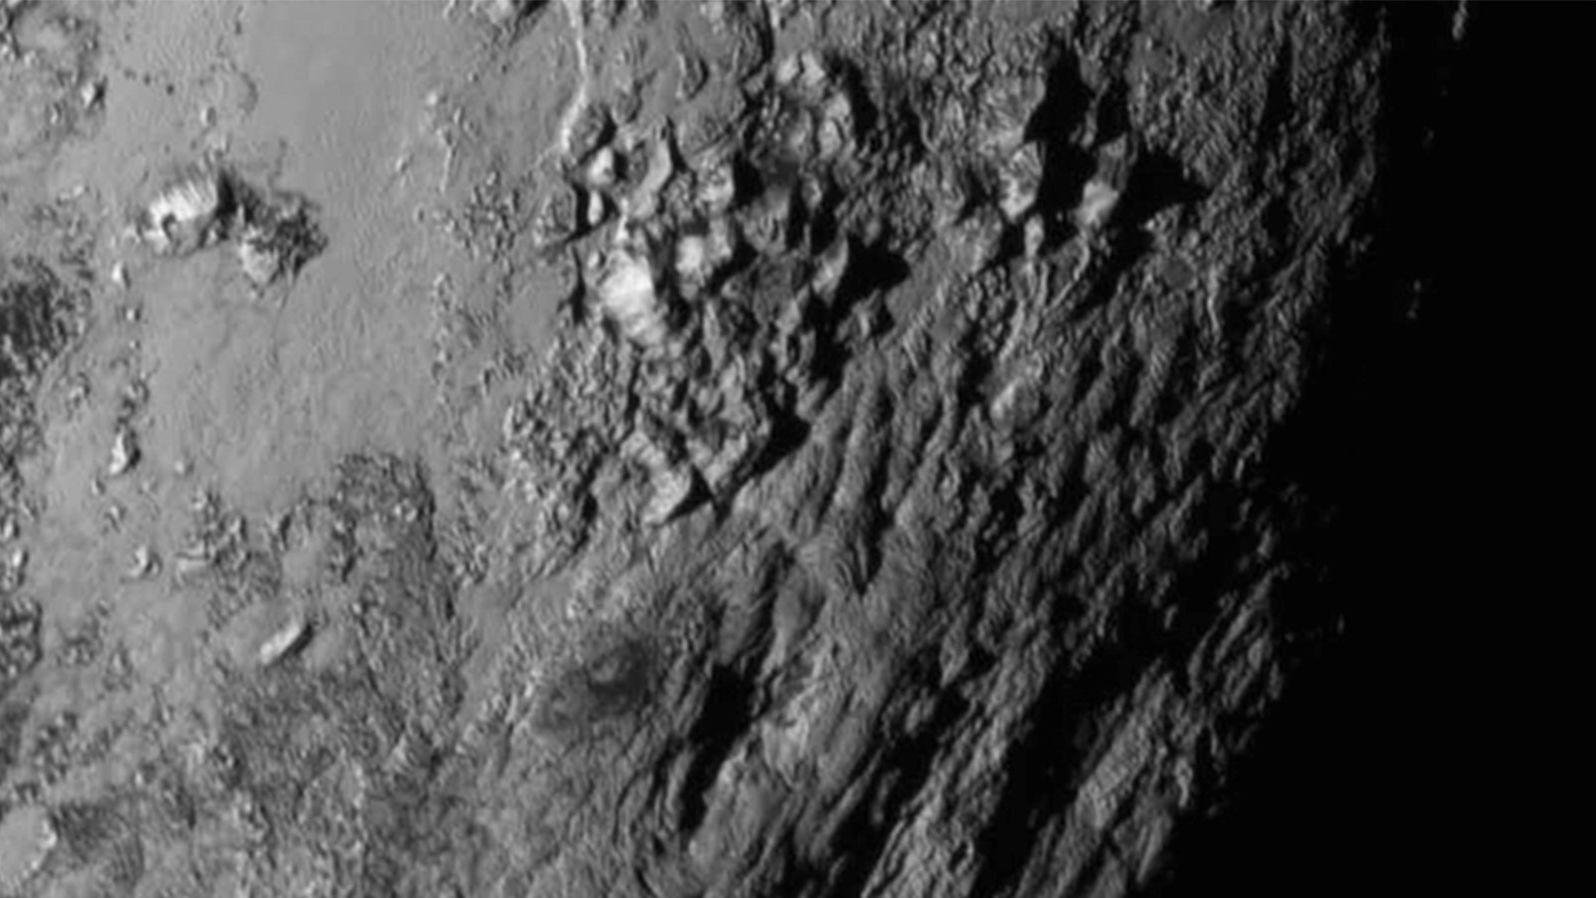 New close-up images of a region near Pluto's equator were released by NASA in 2015. The New Horizons spacecraft was launched in 2006. It's the first spacecraft to explore Pluto and its moons. The mission completed the reconnaissance of the classical solar system, and it made the United States the first nation to send a space probe to every planet from Mercury to Pluto.